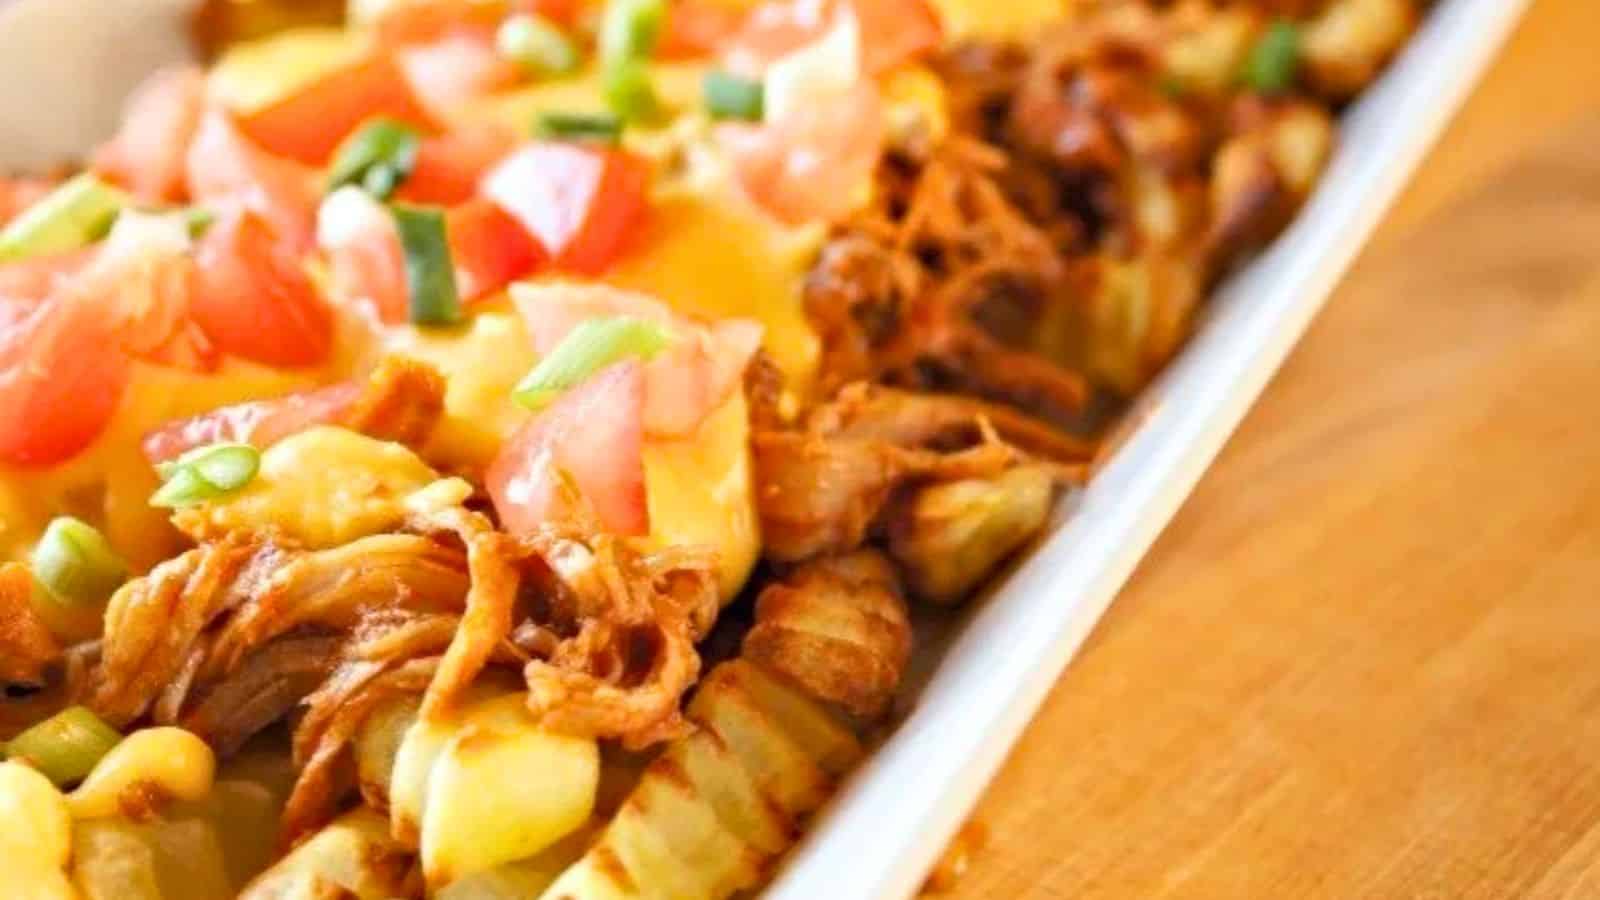 Image shows a white tray filled with Pulled Pork French Fry Nachos.